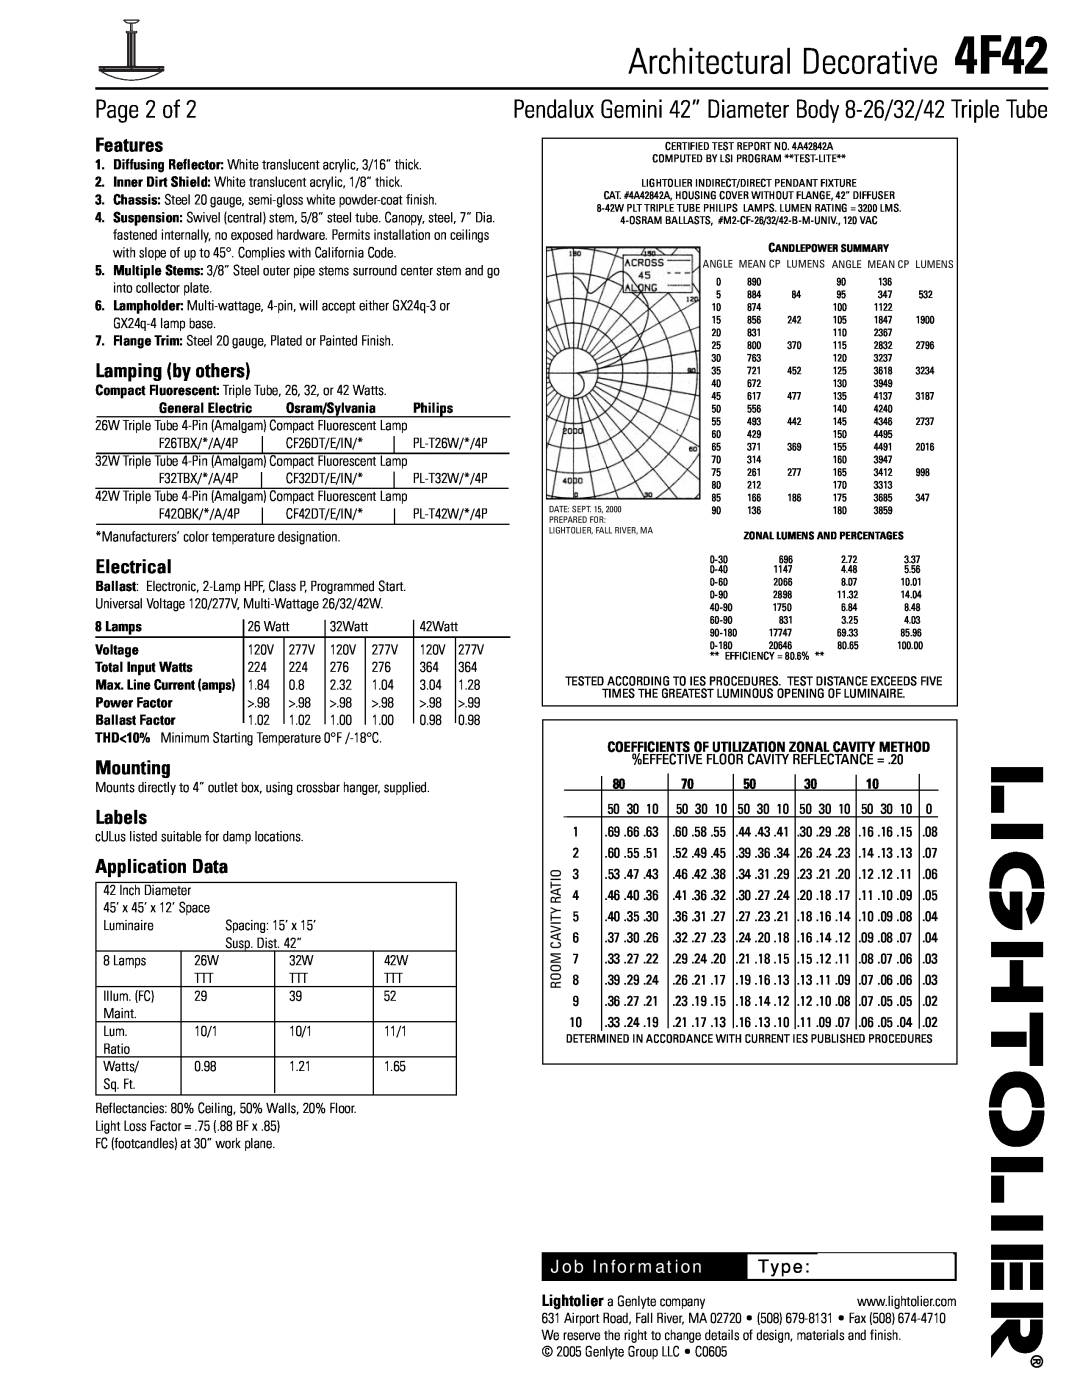 Lightolier 4F42 specifications Page 2 of, Features, Lamping by others, Electrical, Mounting, Labels, Application Data, Type 